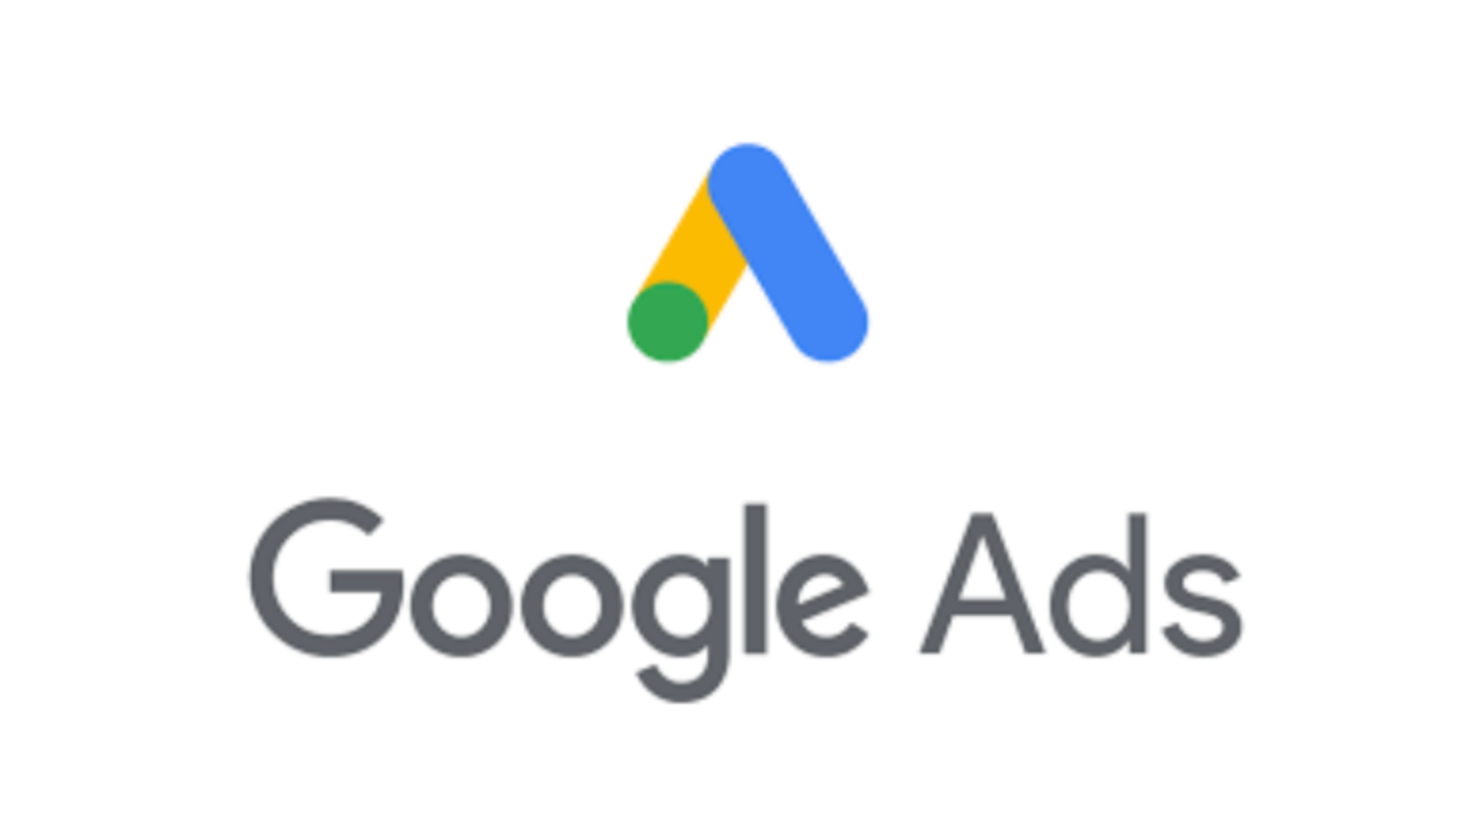 Google Ads Editorial Policy: Updated for Clarity